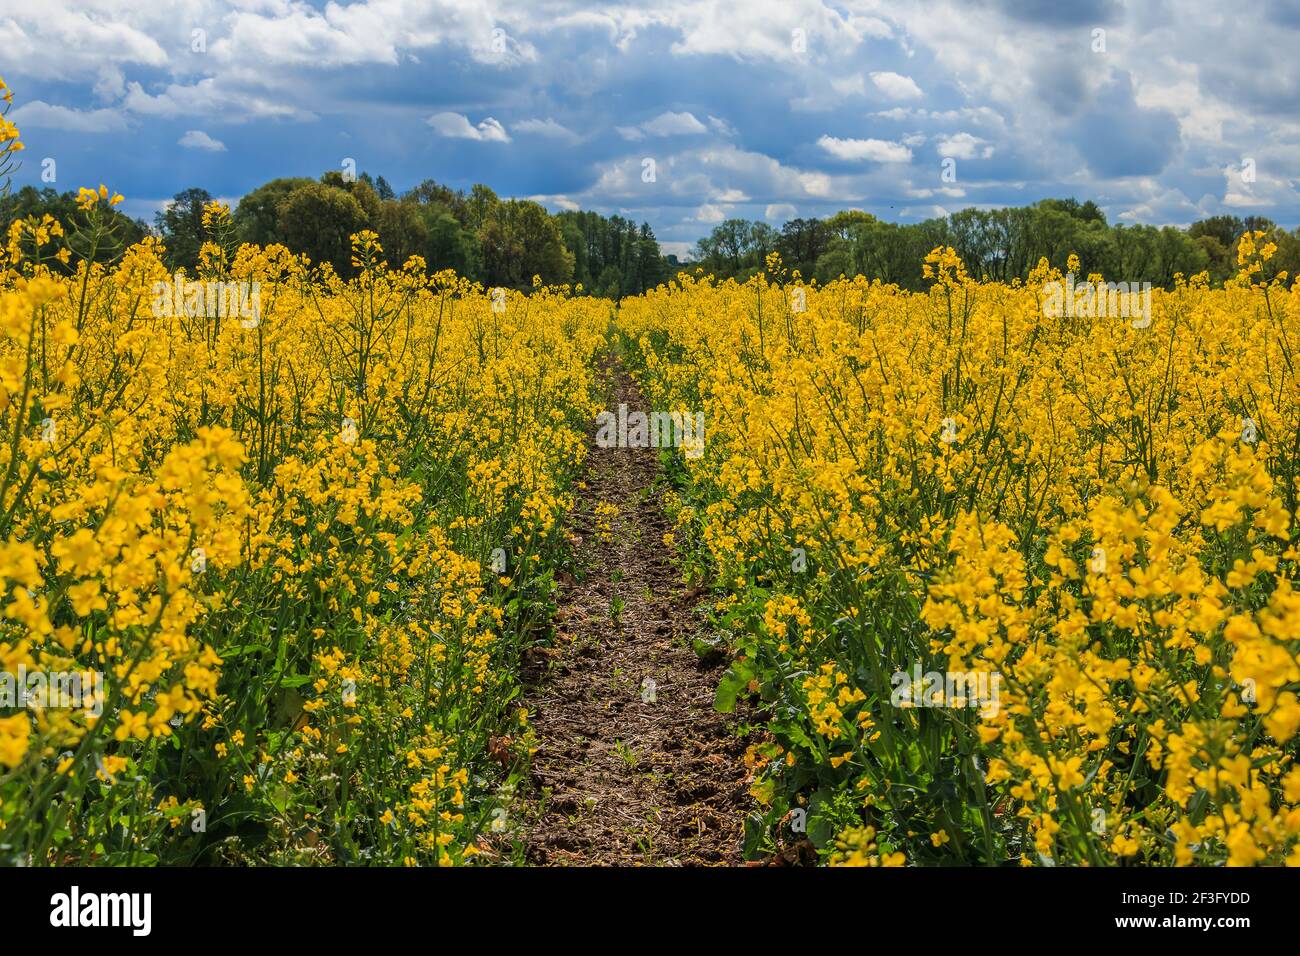 A field with rapeseed plants in bloom. Yellow flowers of the useful plant with green plant stems and leaves. Path in the middle of the field. Clouds o Stock Photo